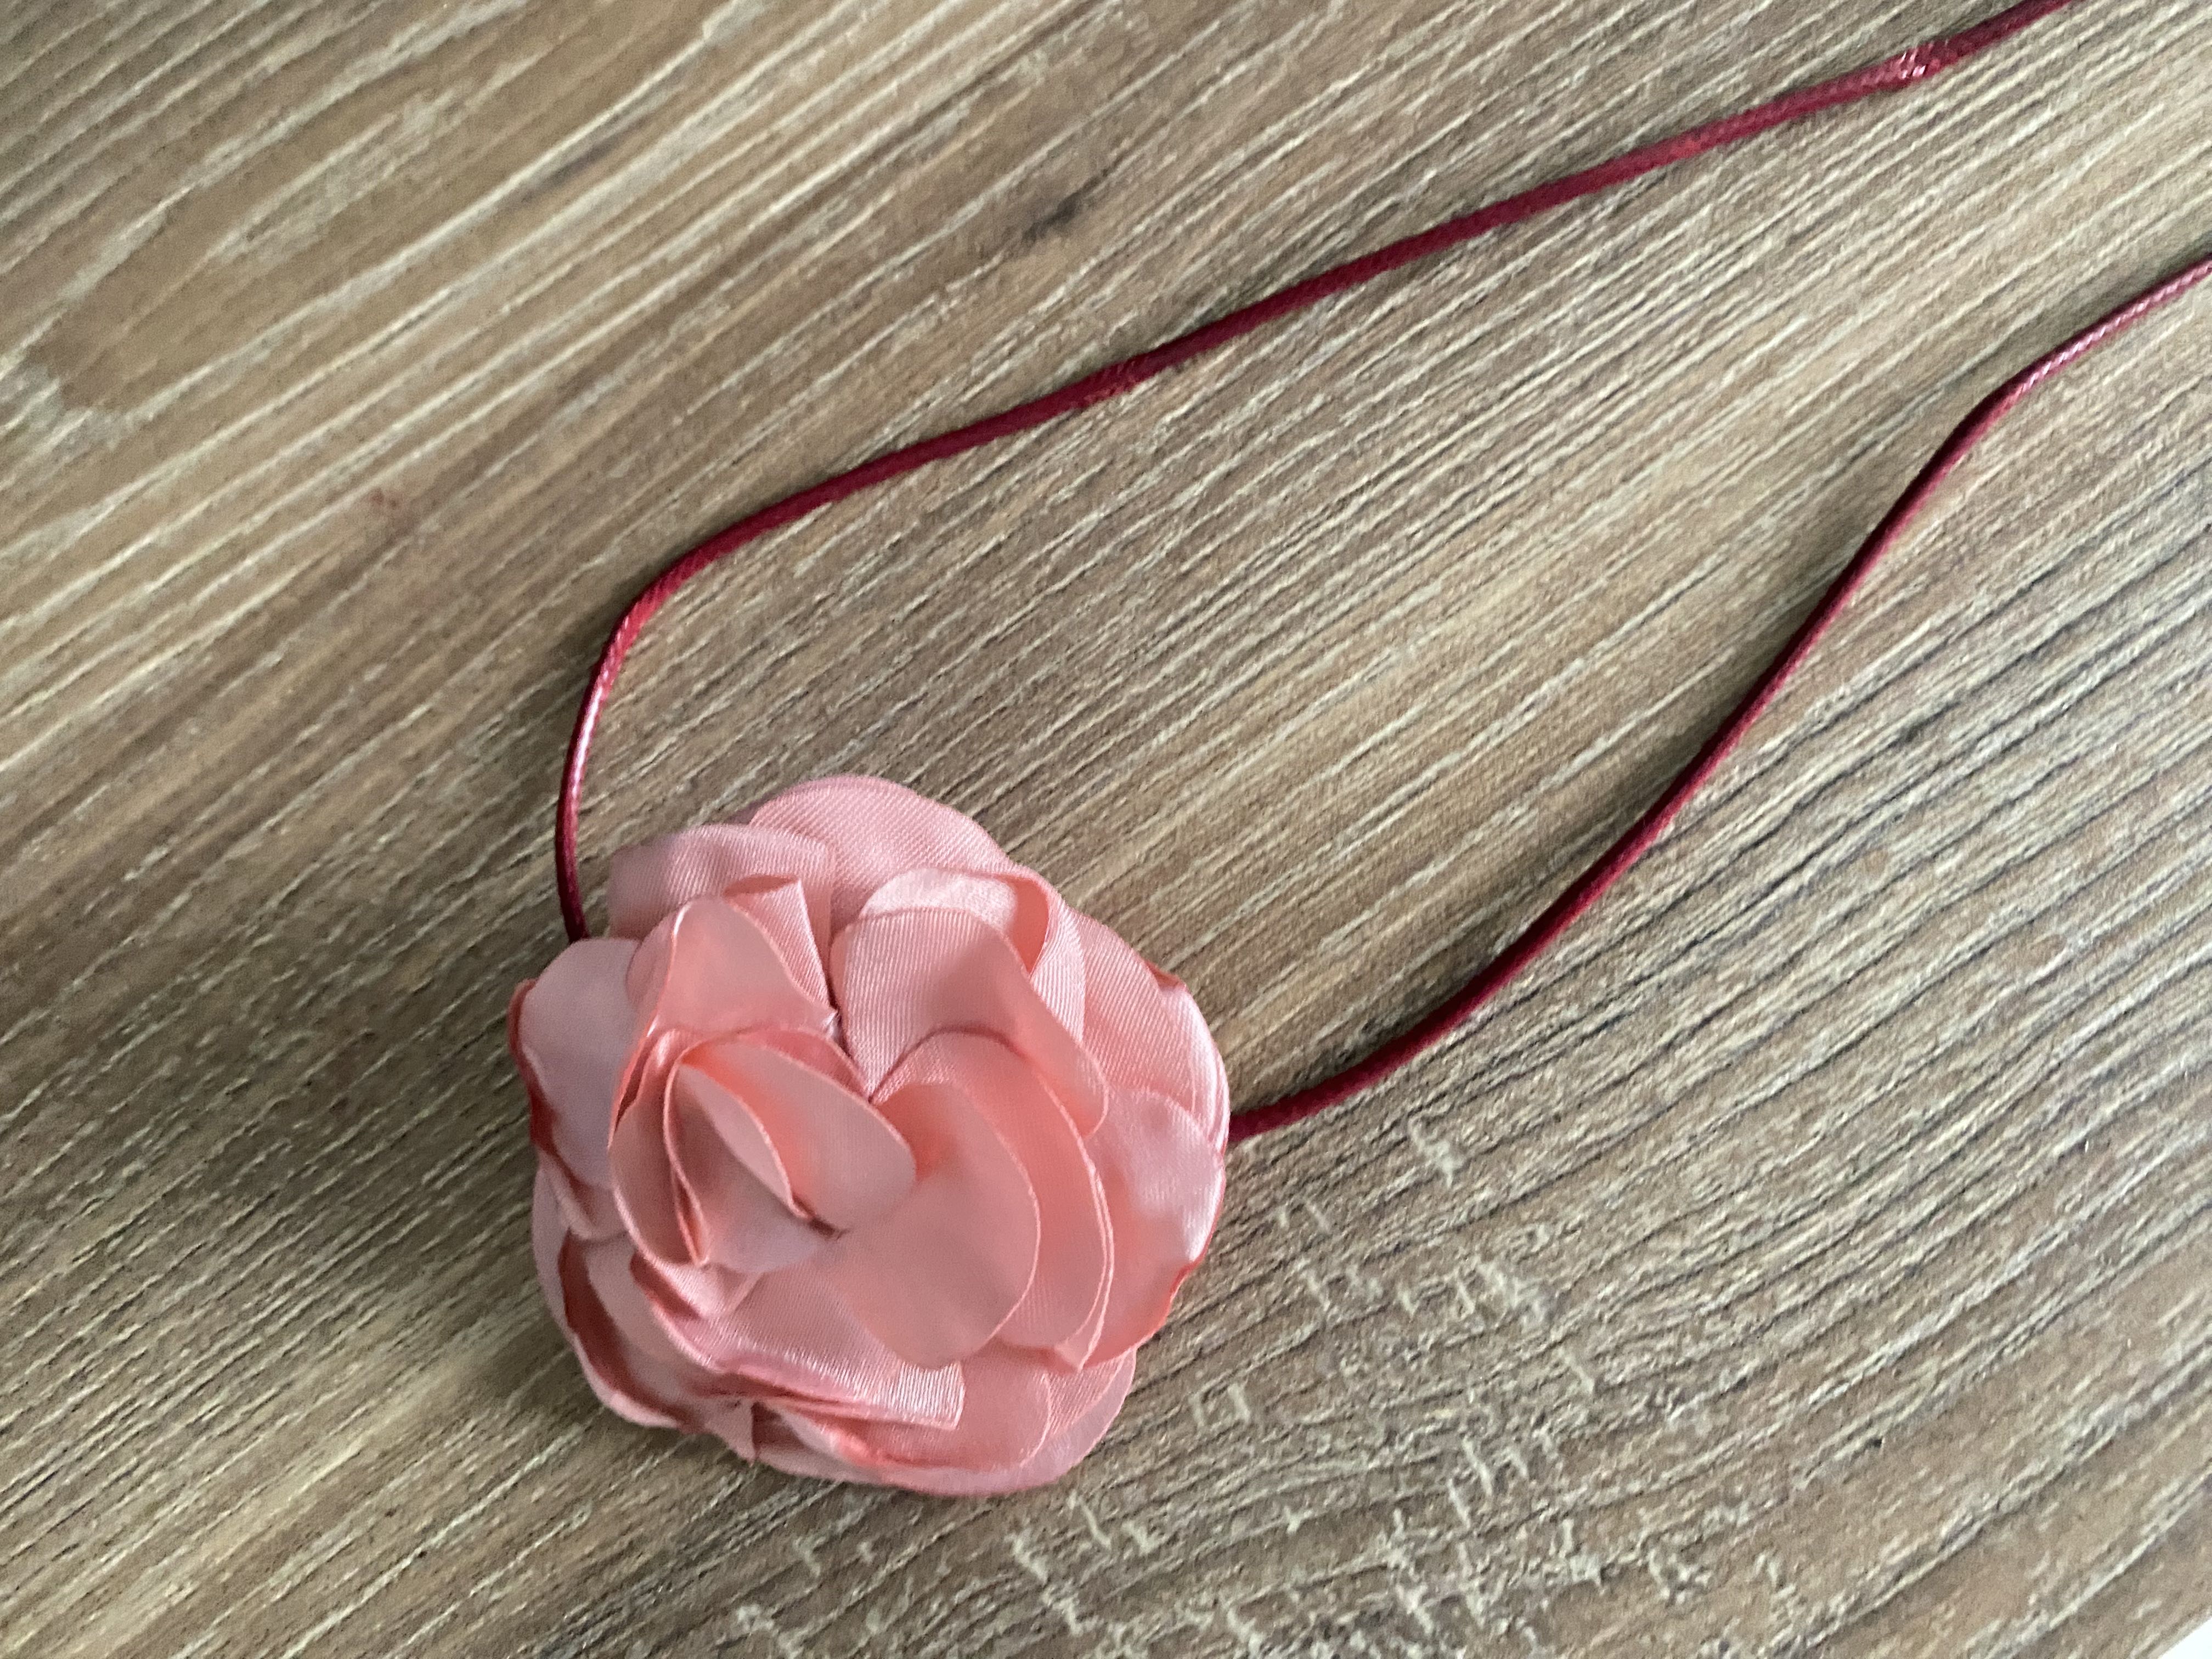 Cider Rose Decor Choker Necklace for Music Festival/Live House Party/Clubbing,One Size/Black